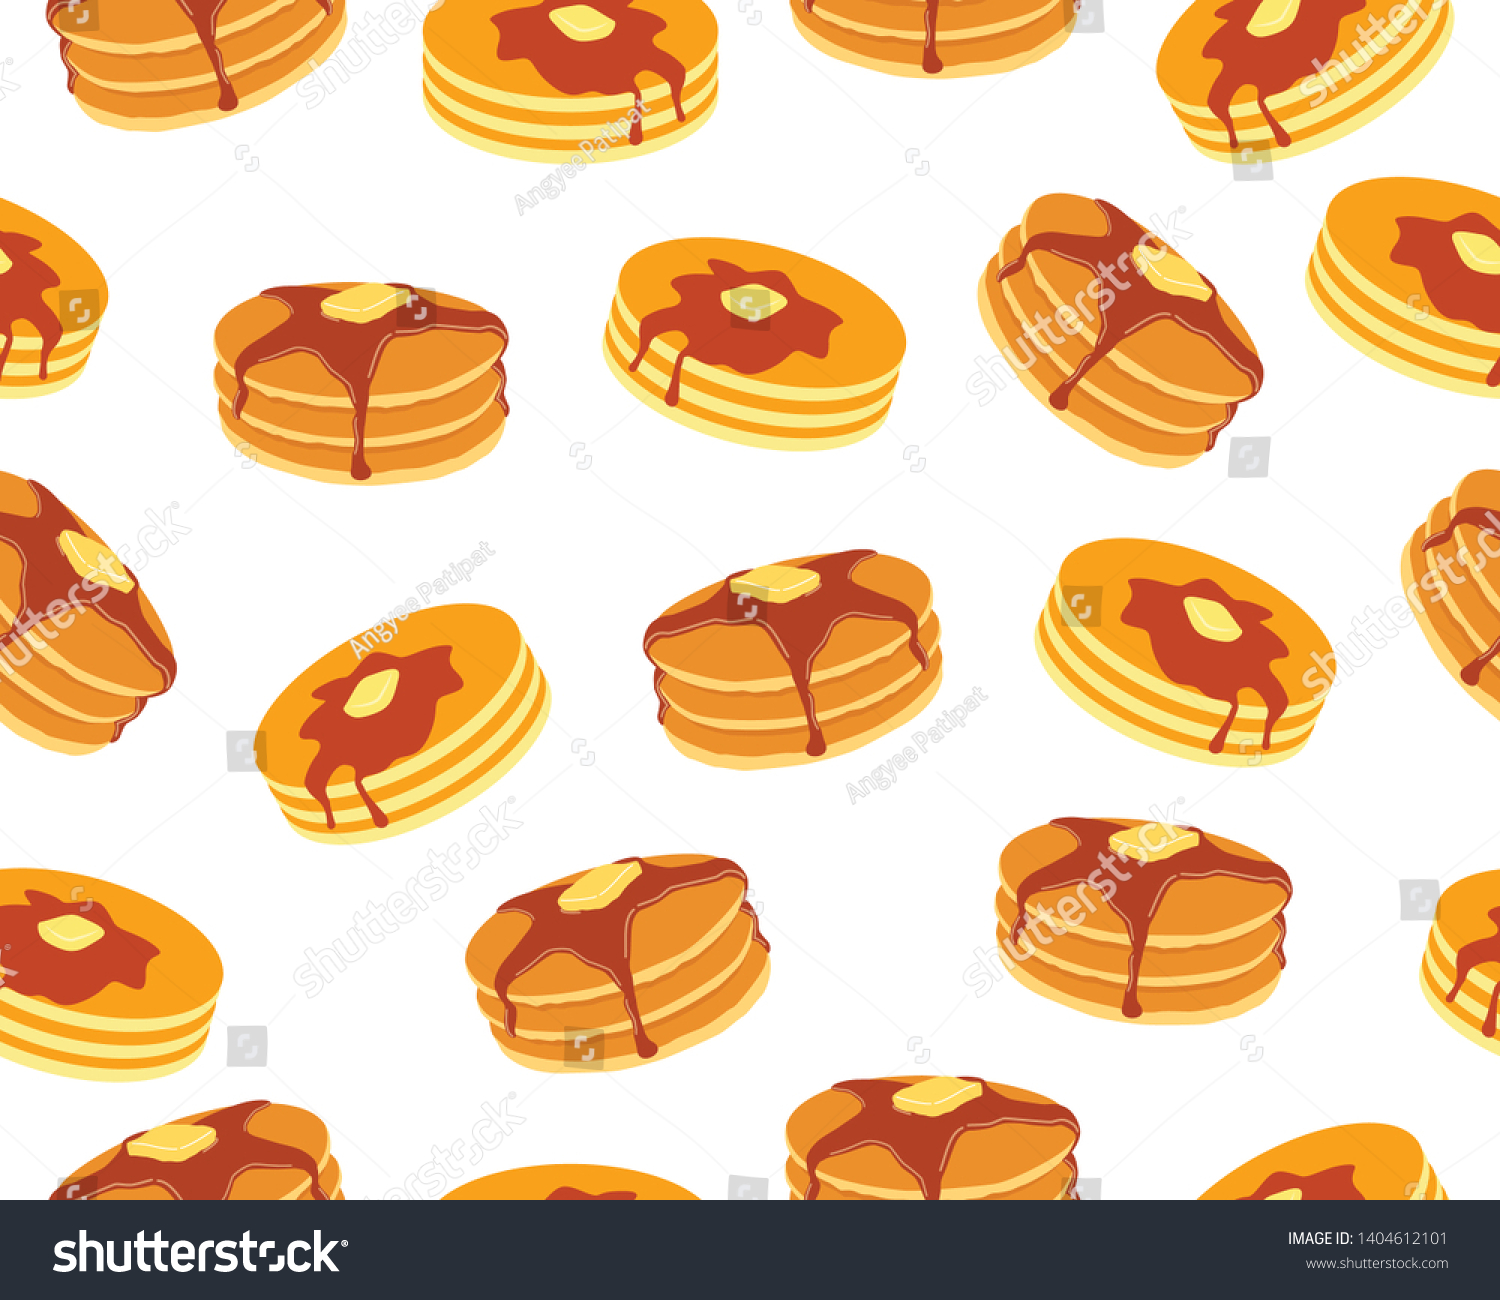 SVG of Seamless pattern of pancakes with butter and maple syrup sweet on white background svg